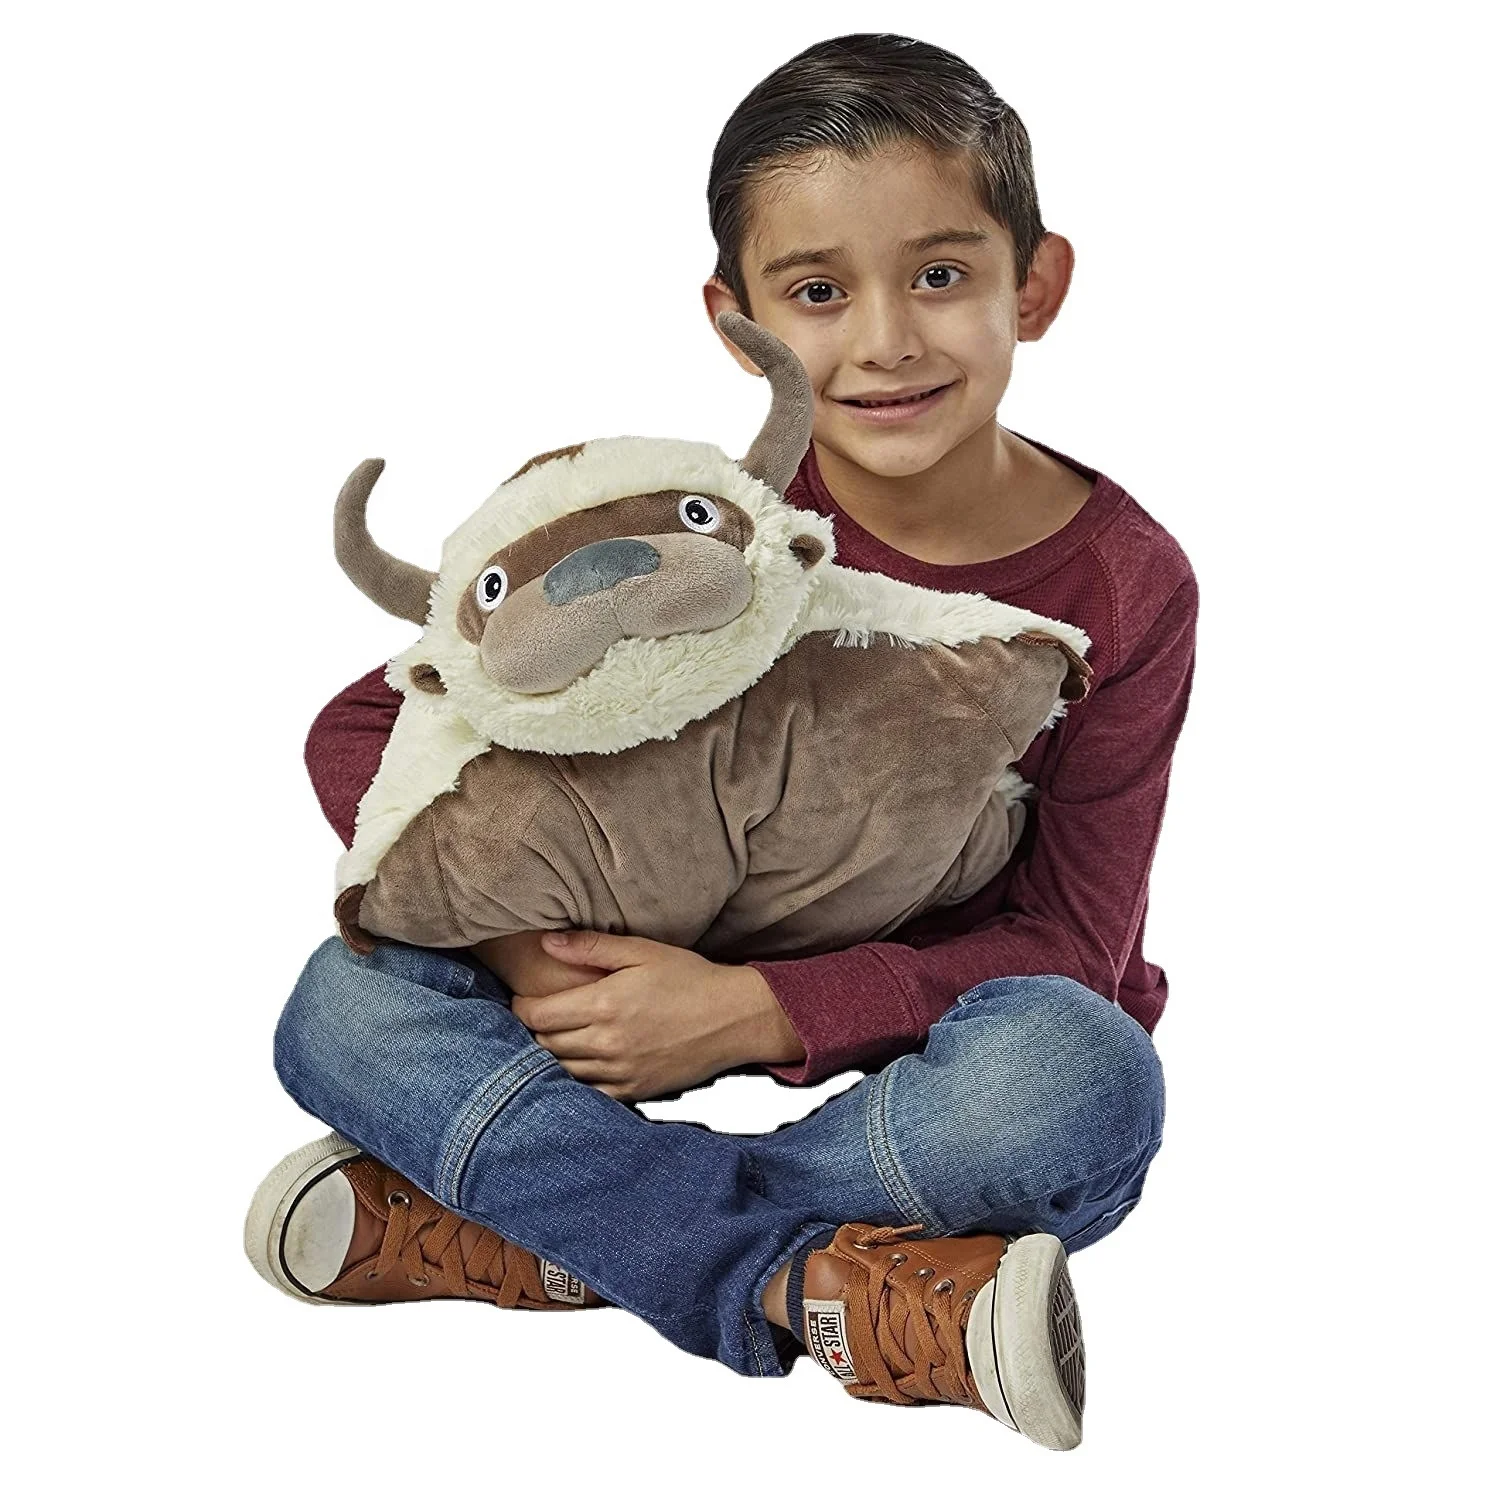 58cm Appa Stuffed Animal Pillow,Nickelodeon Avatar The Last Airbender Plush  Toy Pillow - Buy The Last Airbender Plush Pillow,Plush Appa Pillow,Stuffed  Appa Pillow Product on 